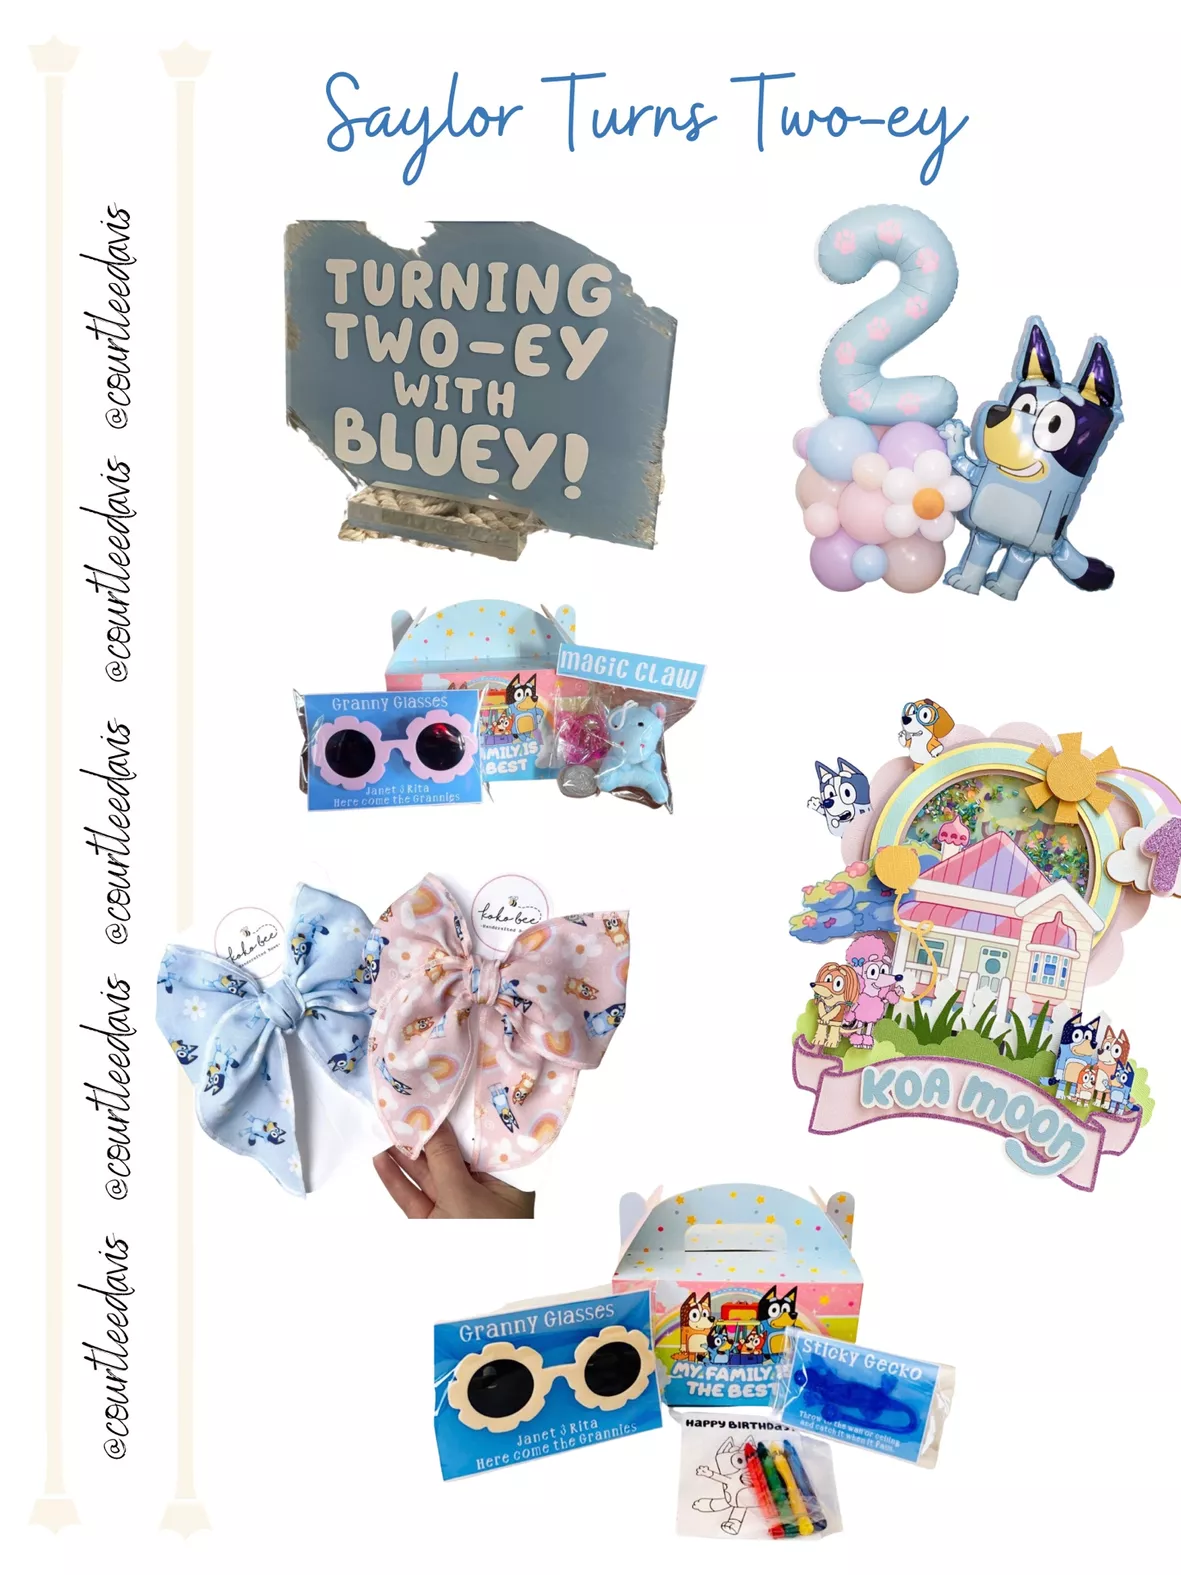 How to Guide: Bluey Picnic Party – Lovely Occasions